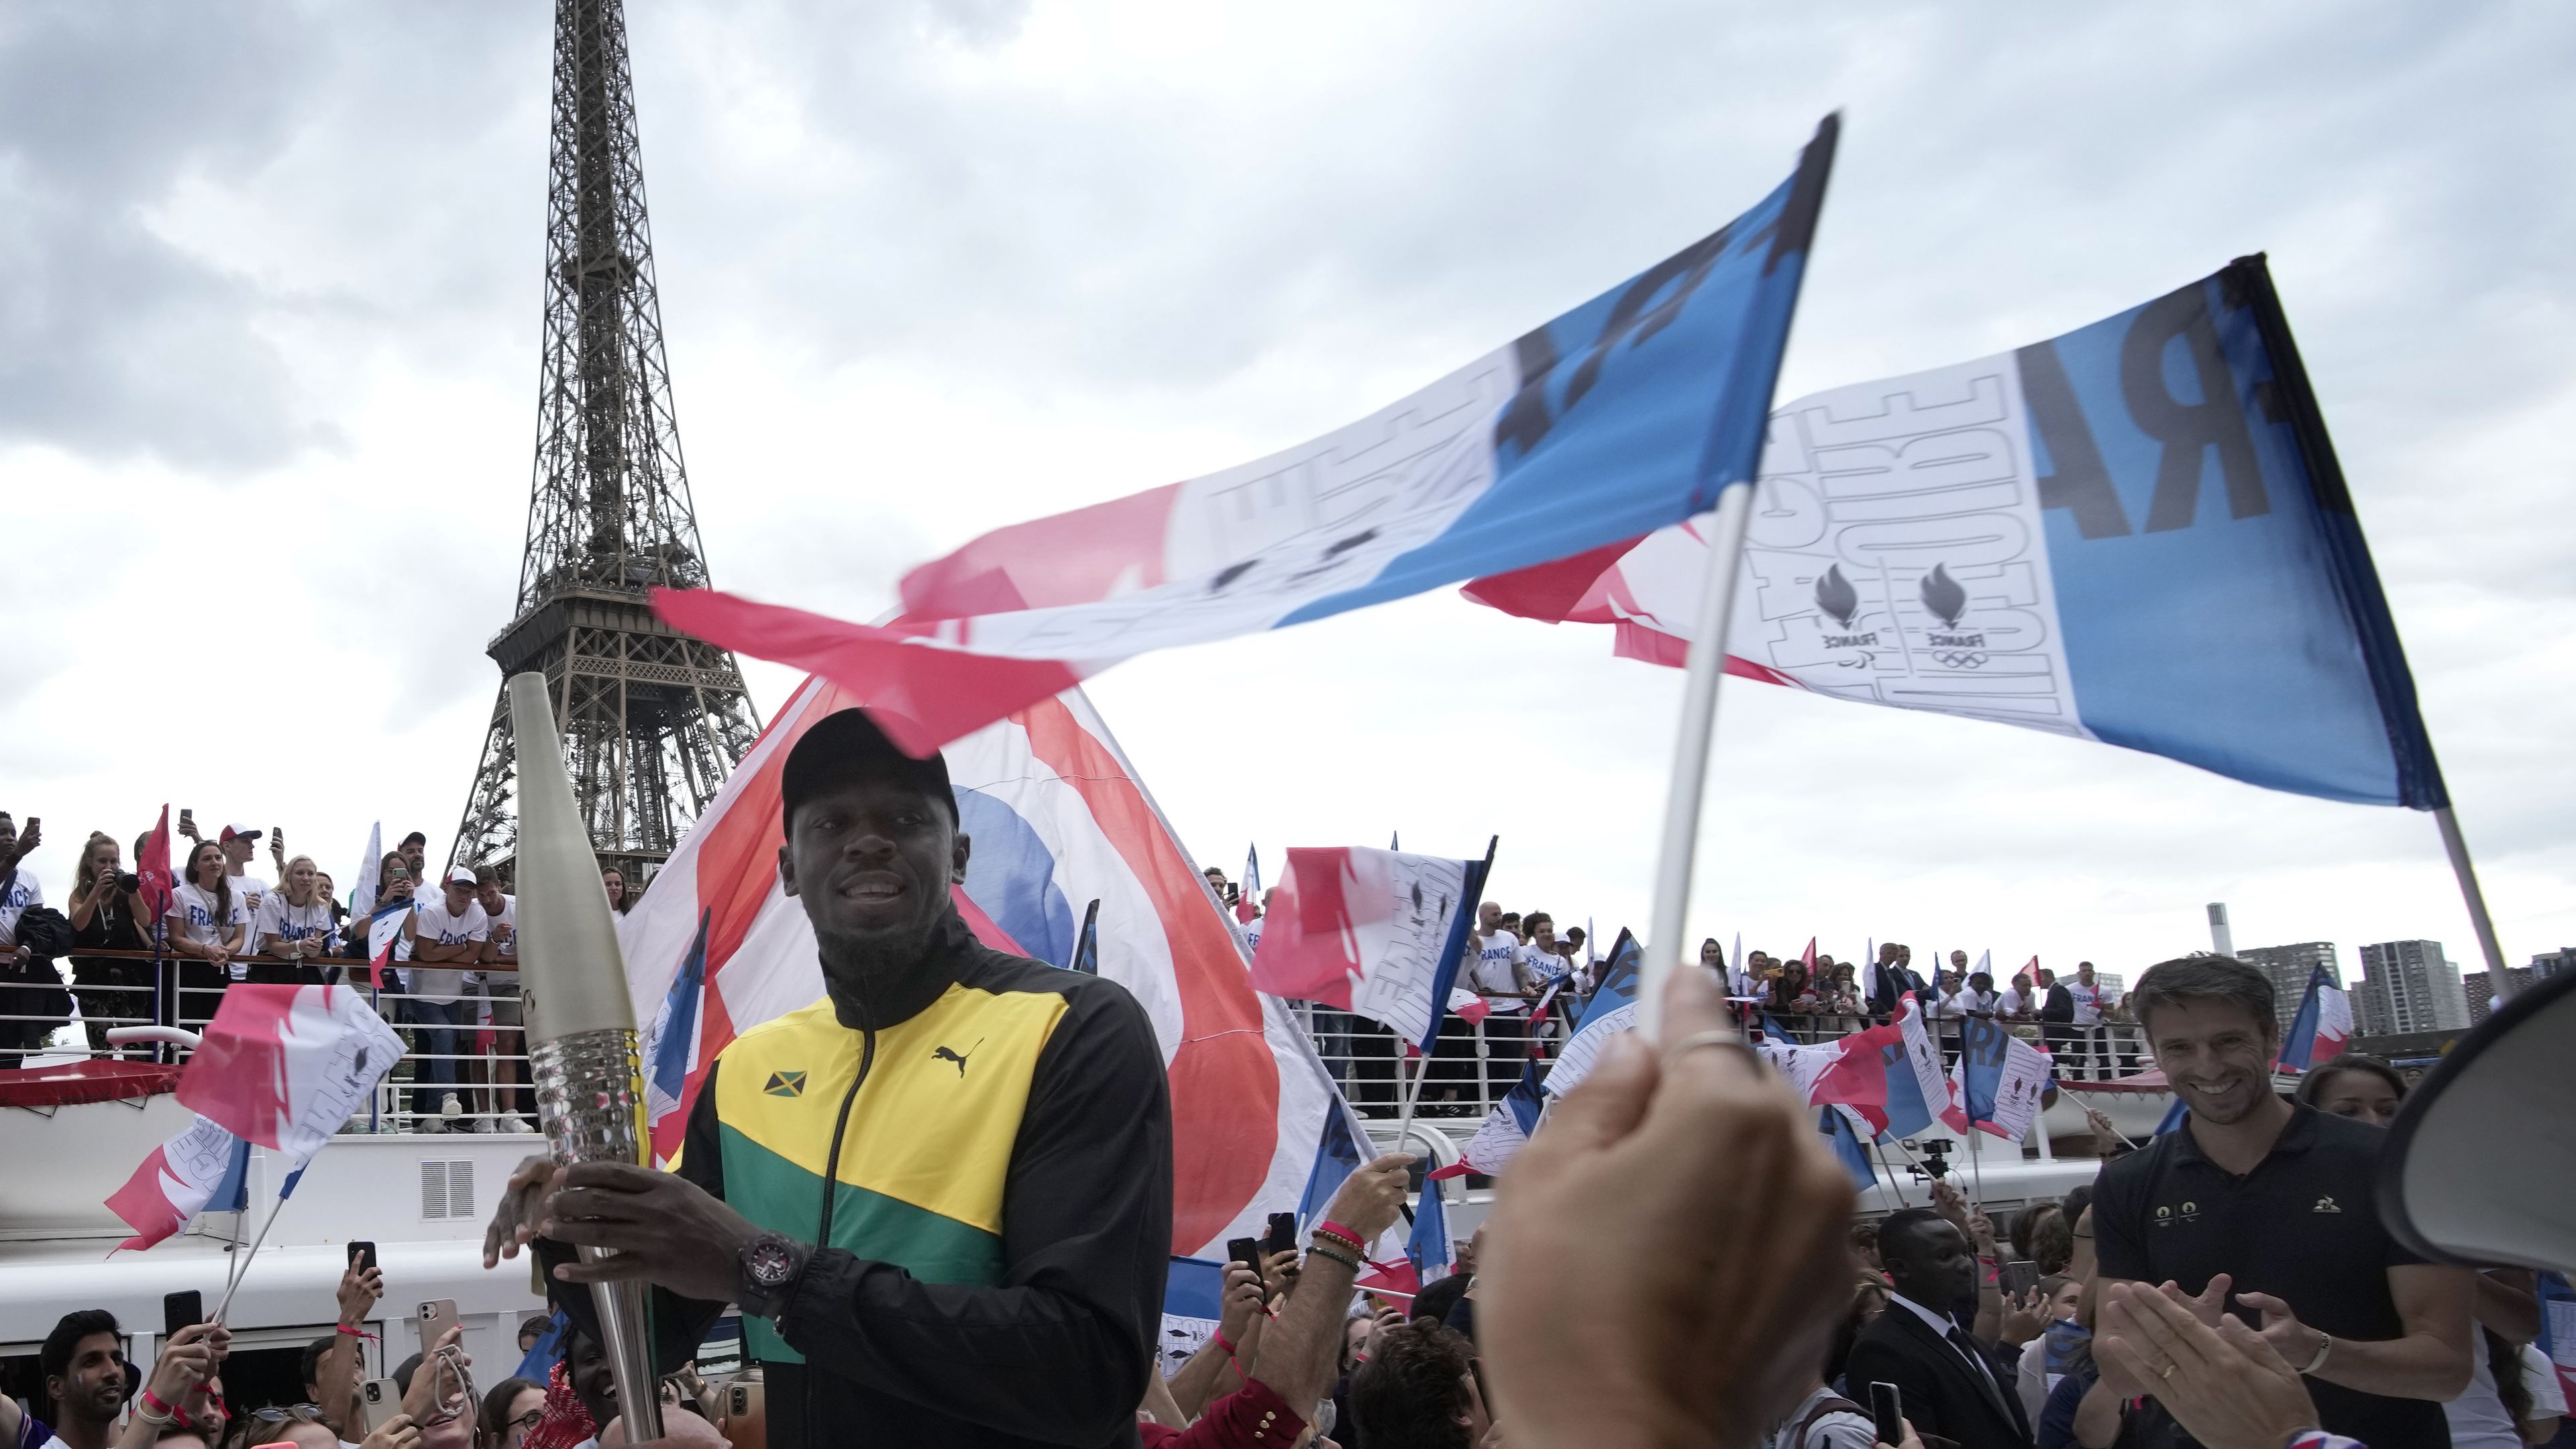 Olympics legend Usain Bolt with the torch as Paris celebrated one year until the 2024 Games.